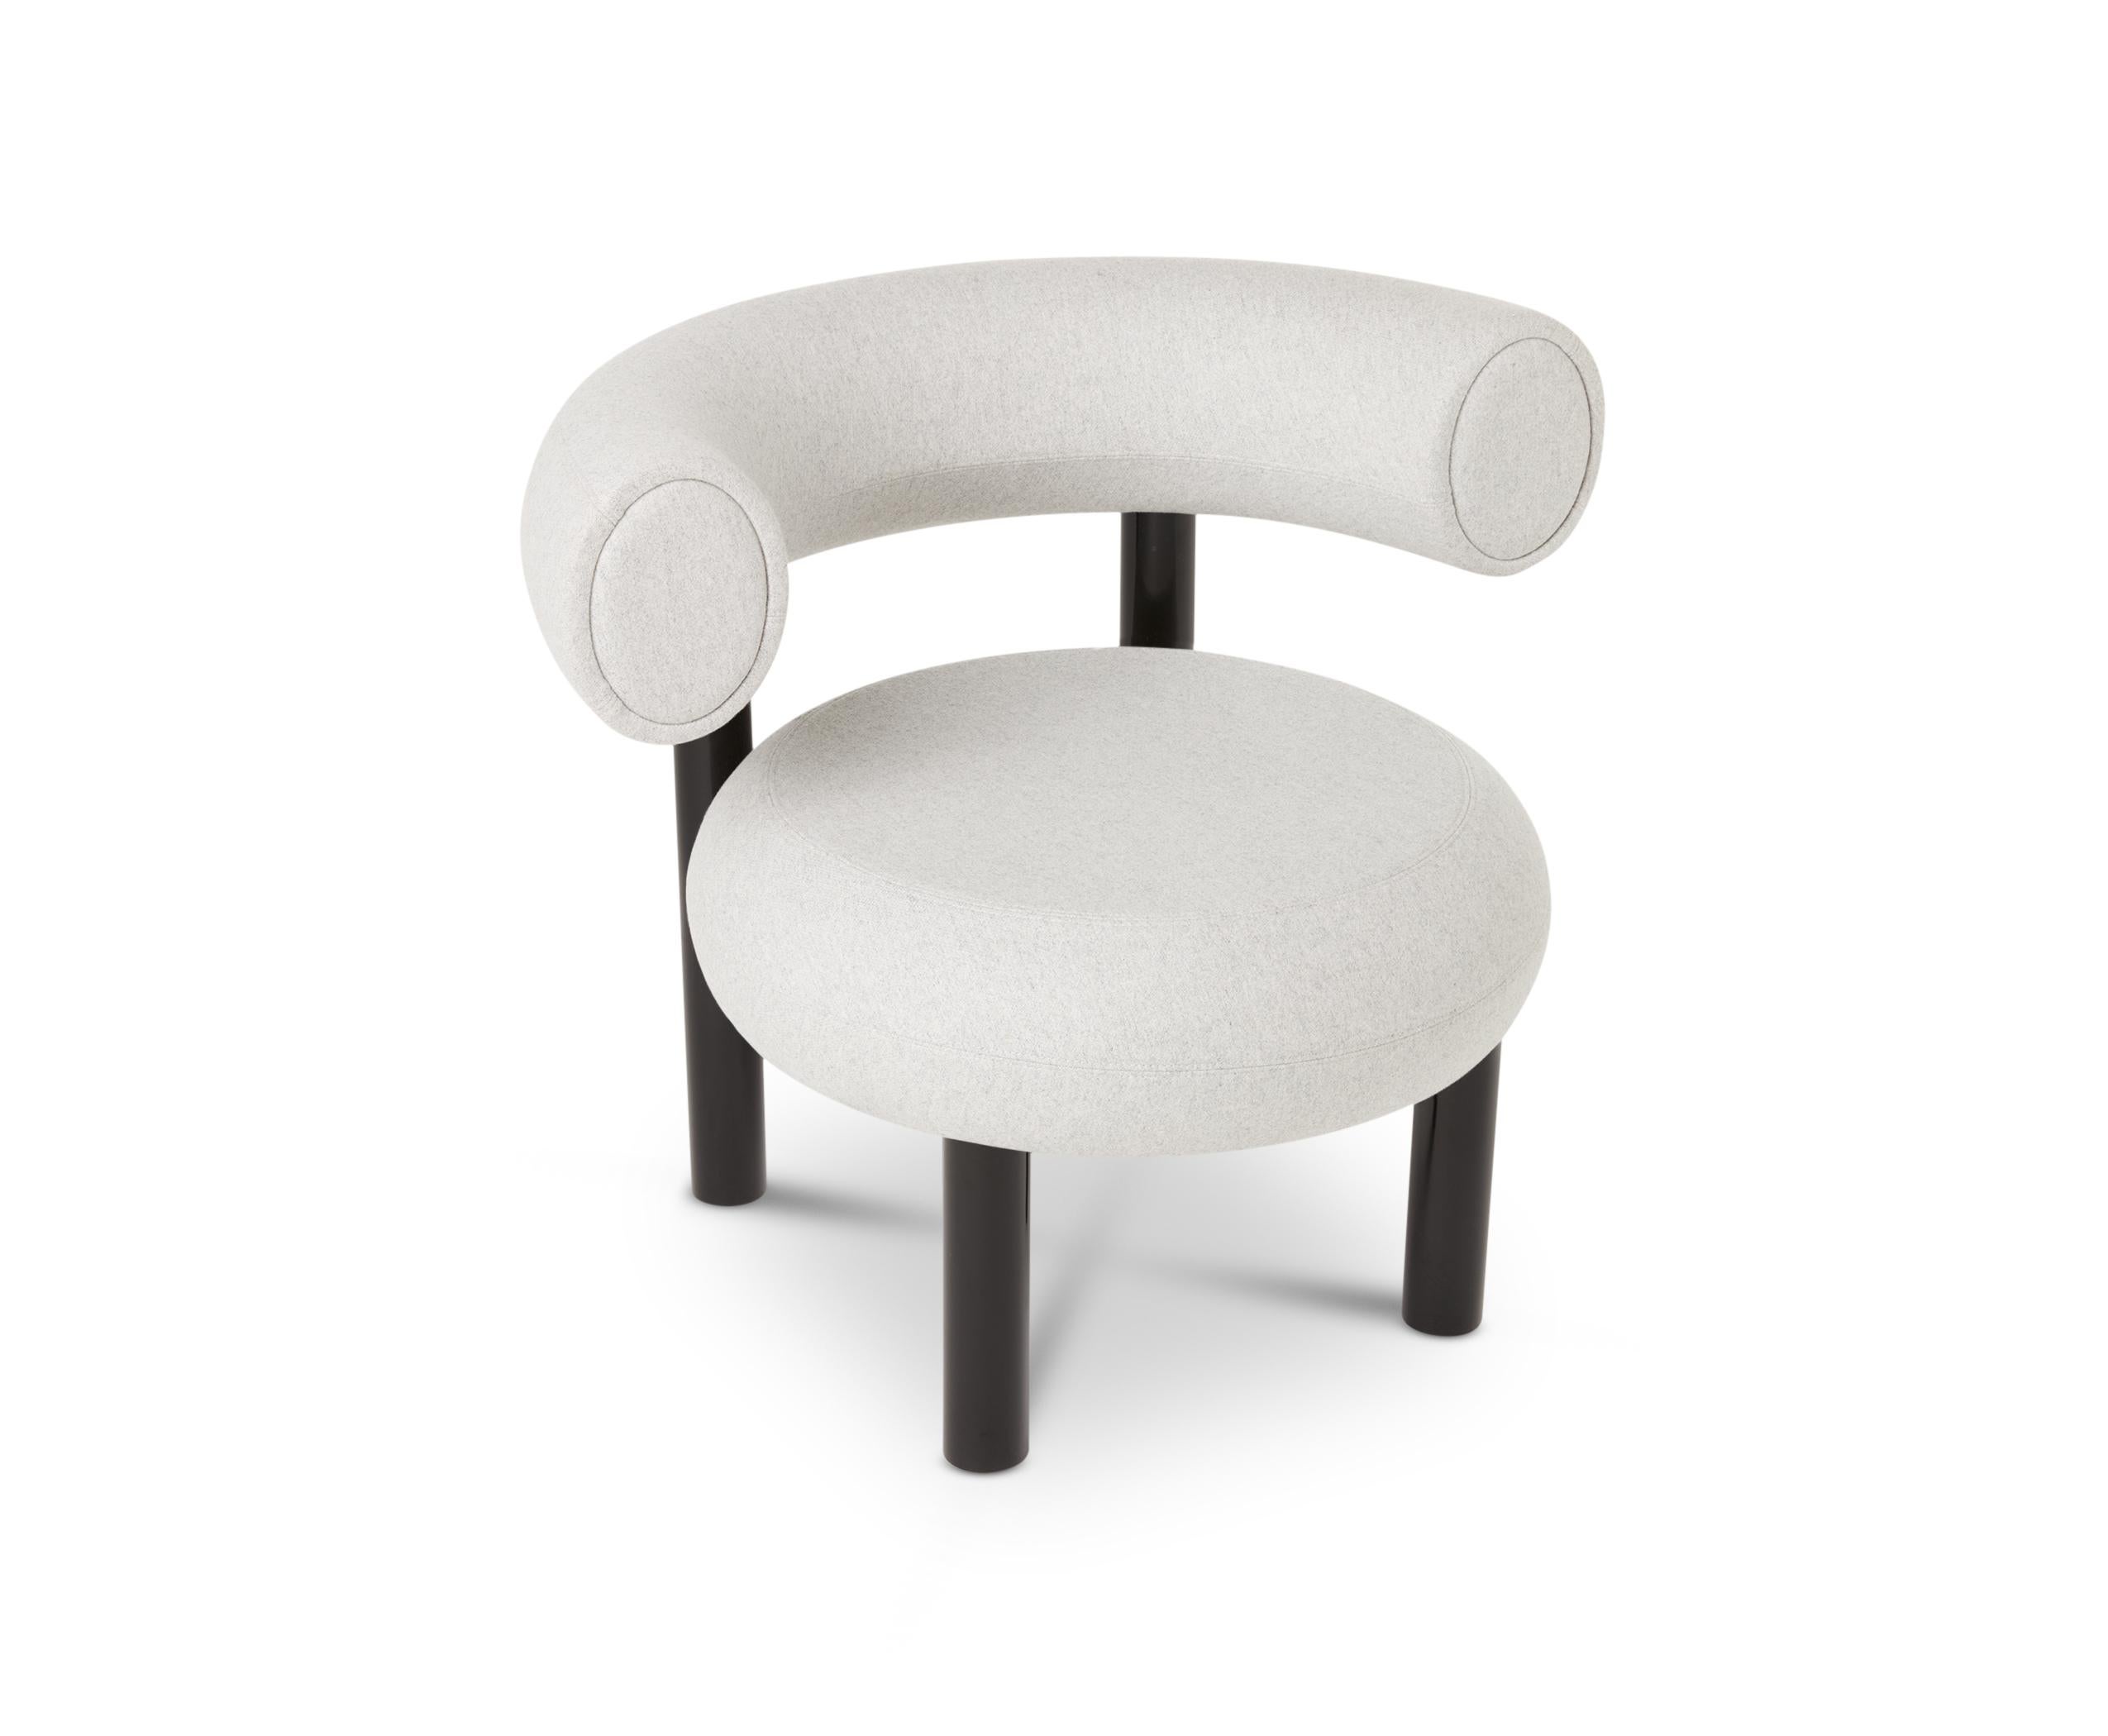 Gray (Mollie Melton 0103.jpg) FAT Lounge Chair with Black Legs by Tom Dixon